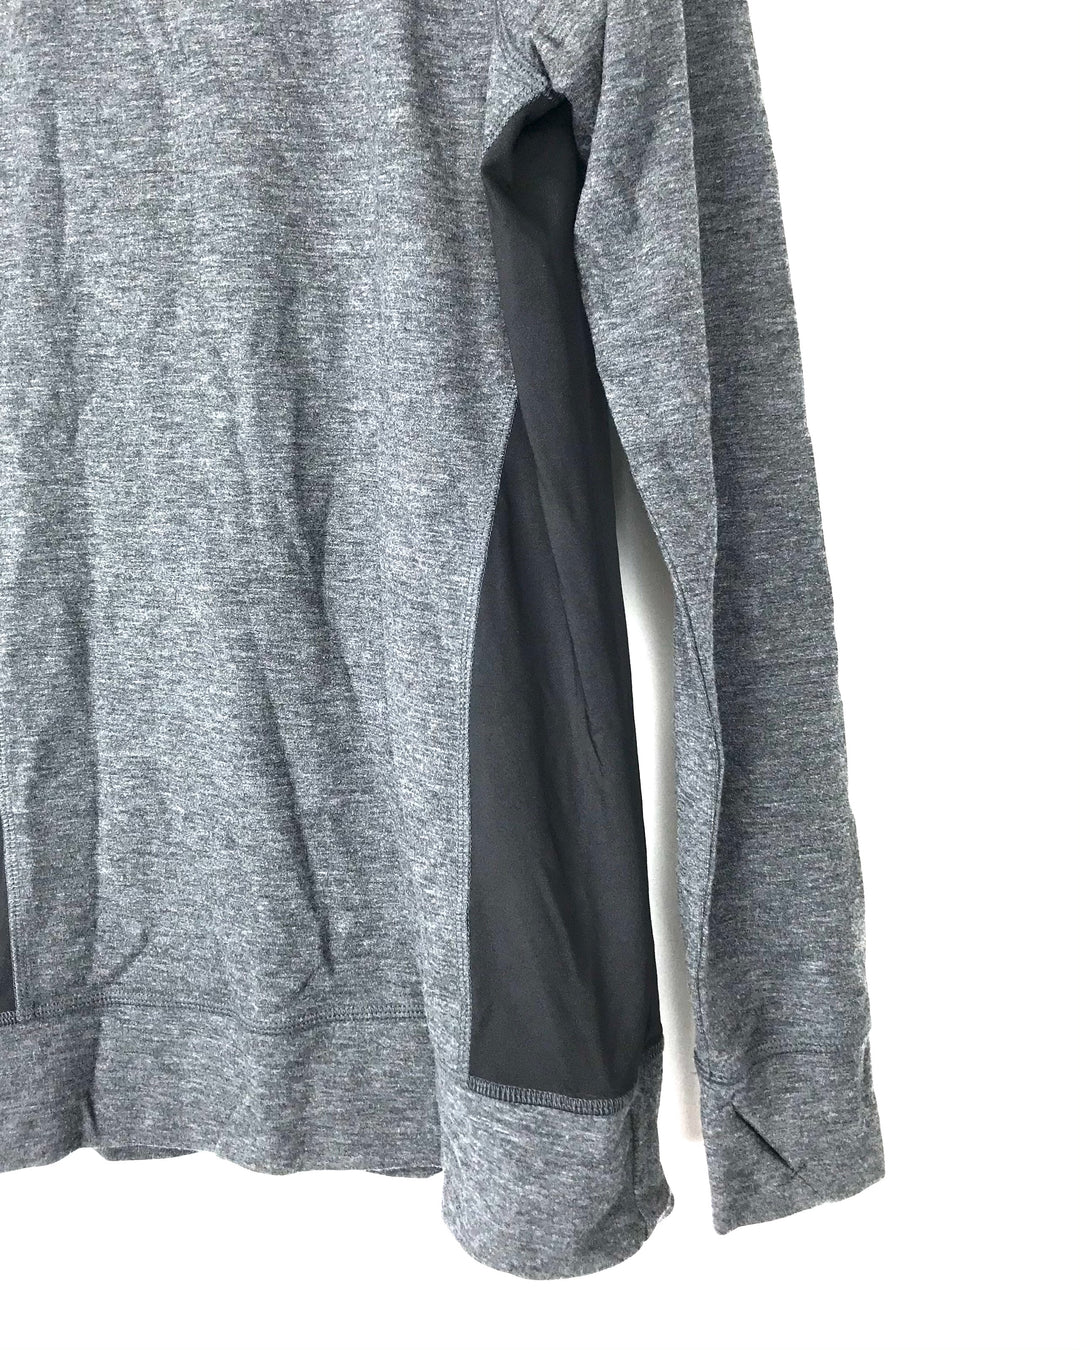 Heather Grey and Black Long Sleeve Top - Small